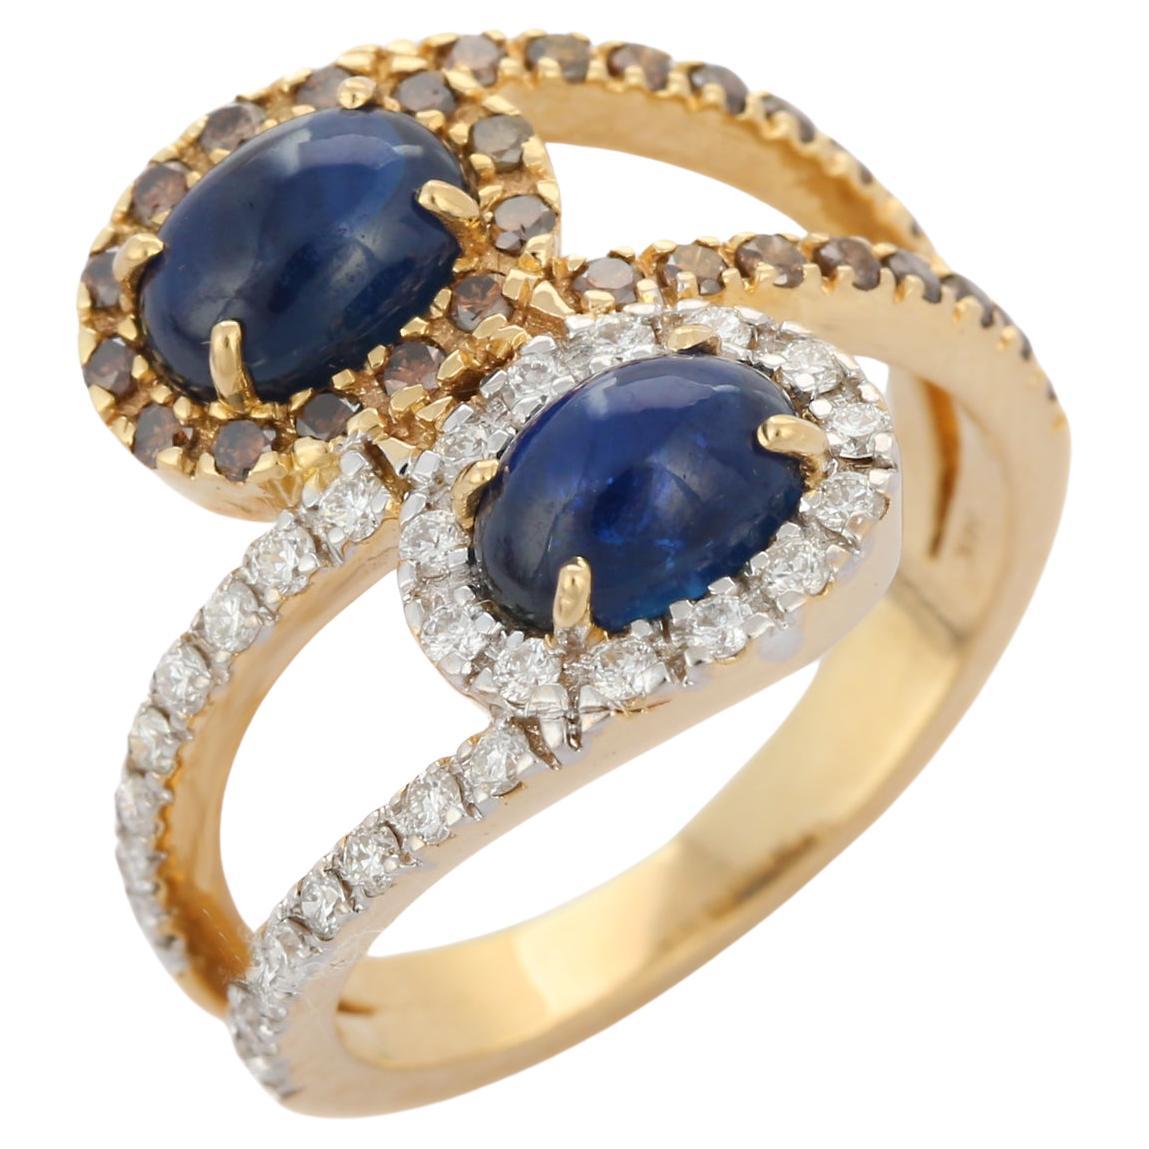 For Sale:  Natural 2.7 ct Blue Sapphire Bypass Wrap Ring with Diamonds in 14K White Gold